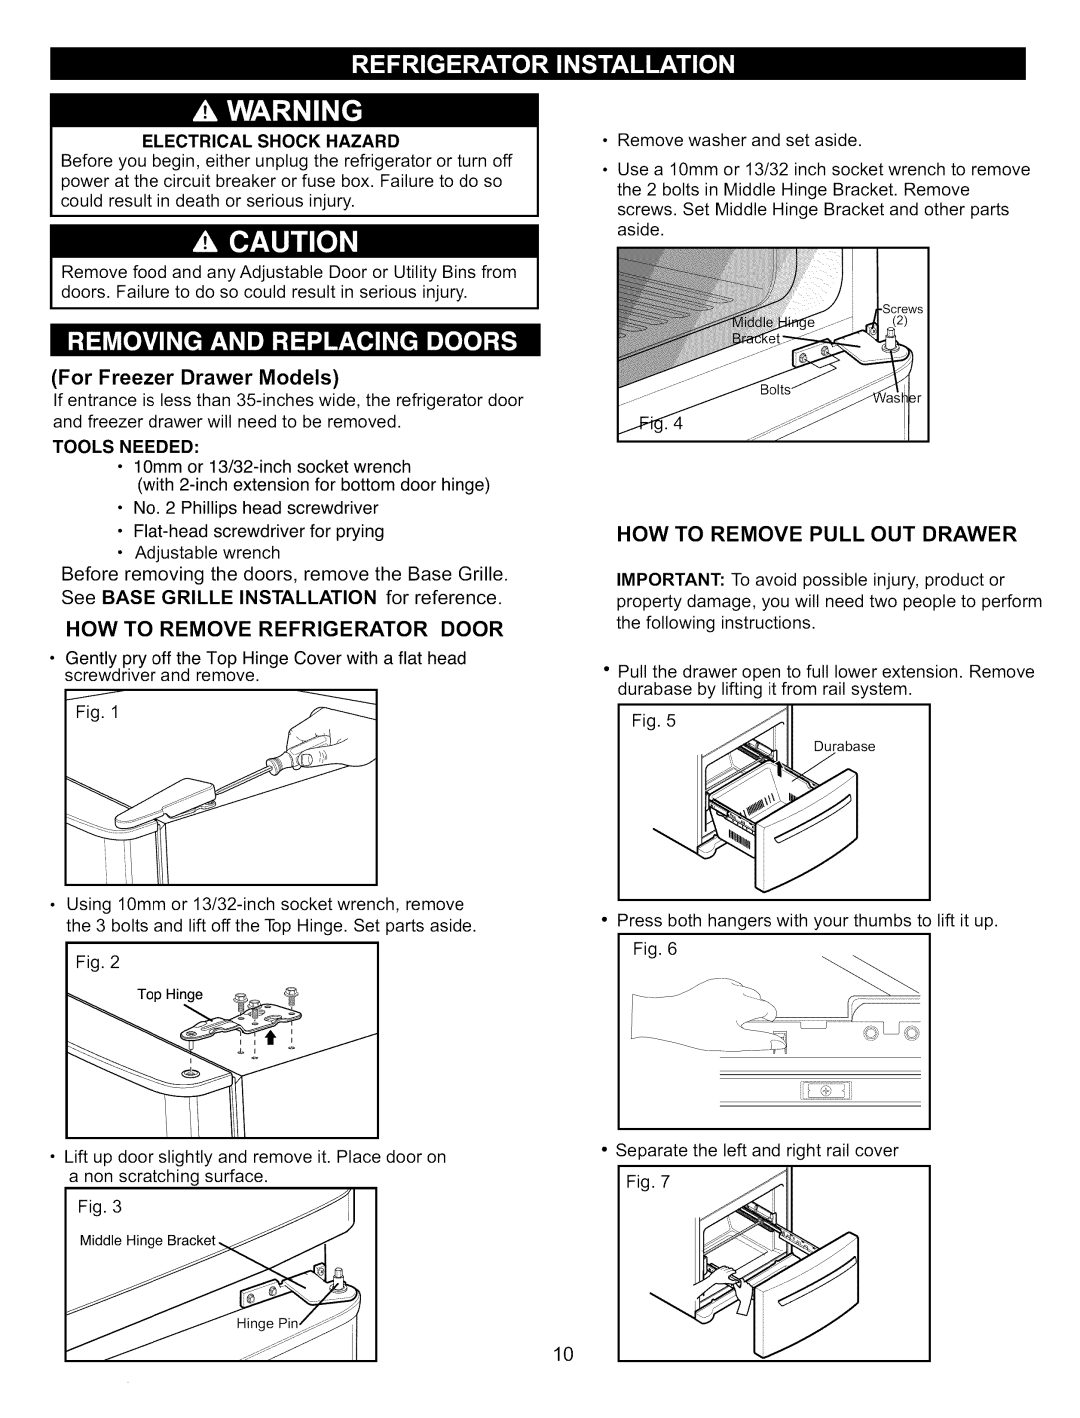 Kenmore 795.7809, 795.7900 manual For Freezer Drawer Models, How To Remove Refrigerator Door, How To Remove Pull Out Drawer 